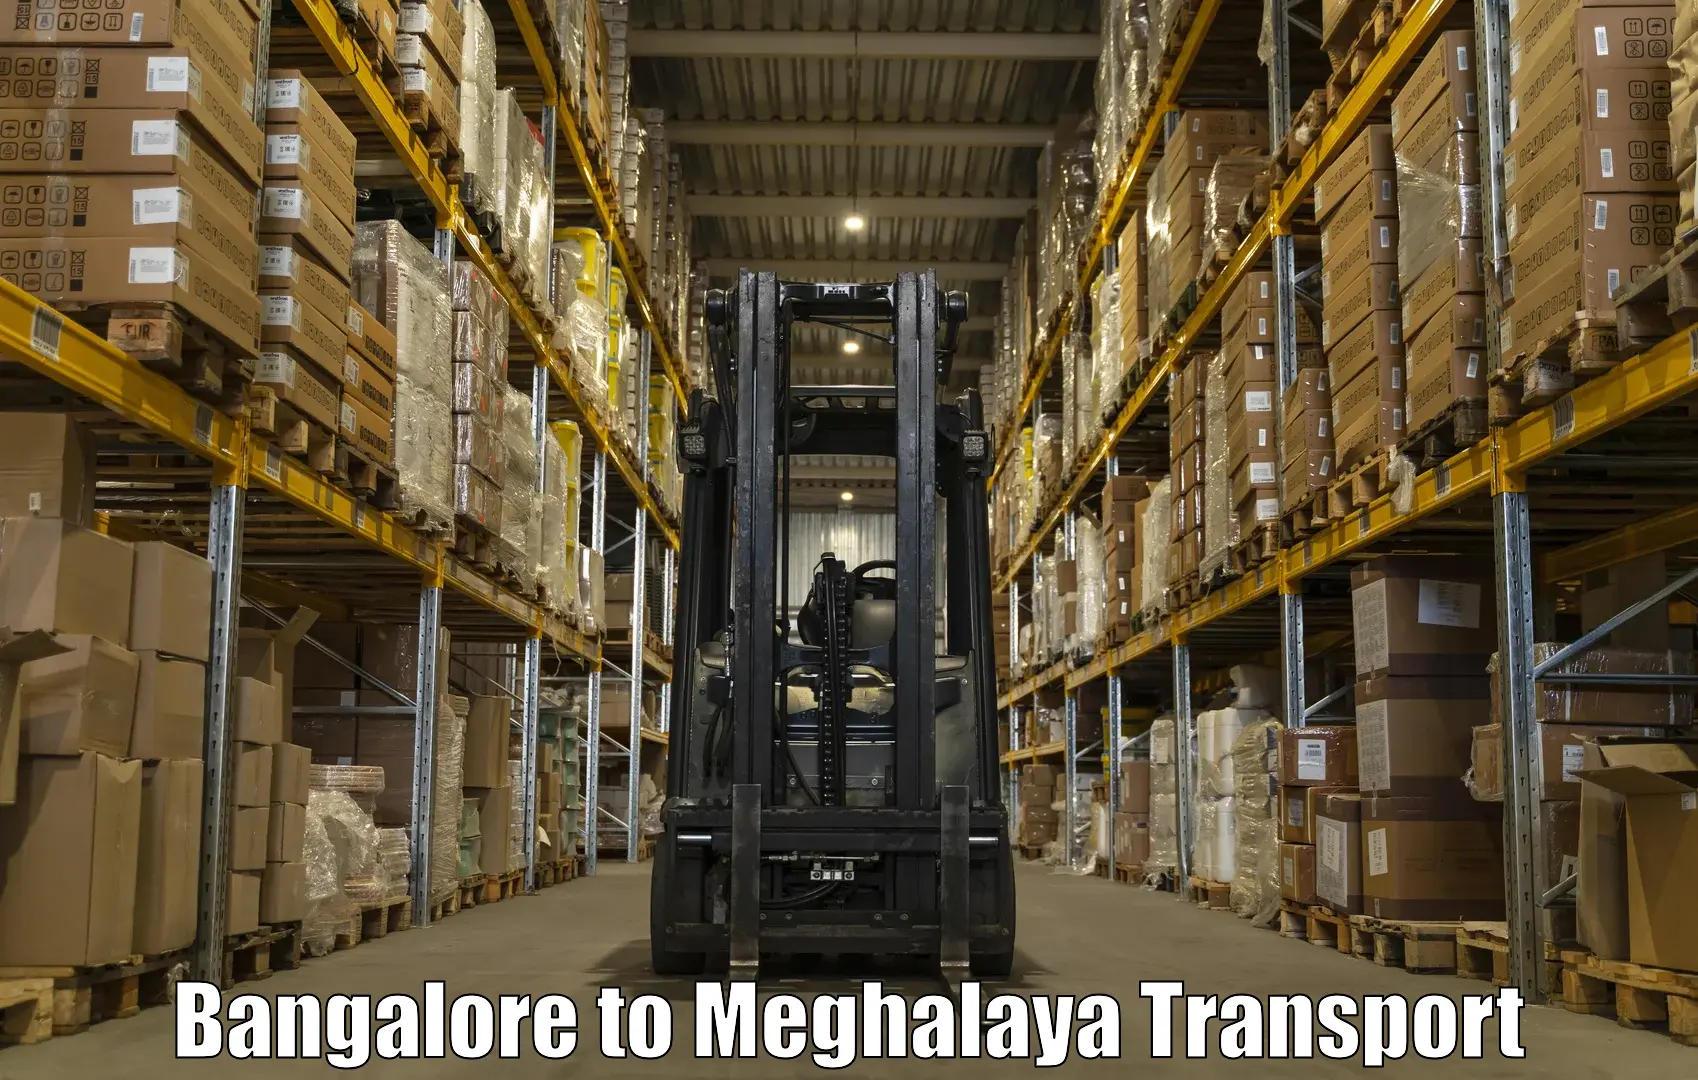 Truck transport companies in India Bangalore to Nongstoin